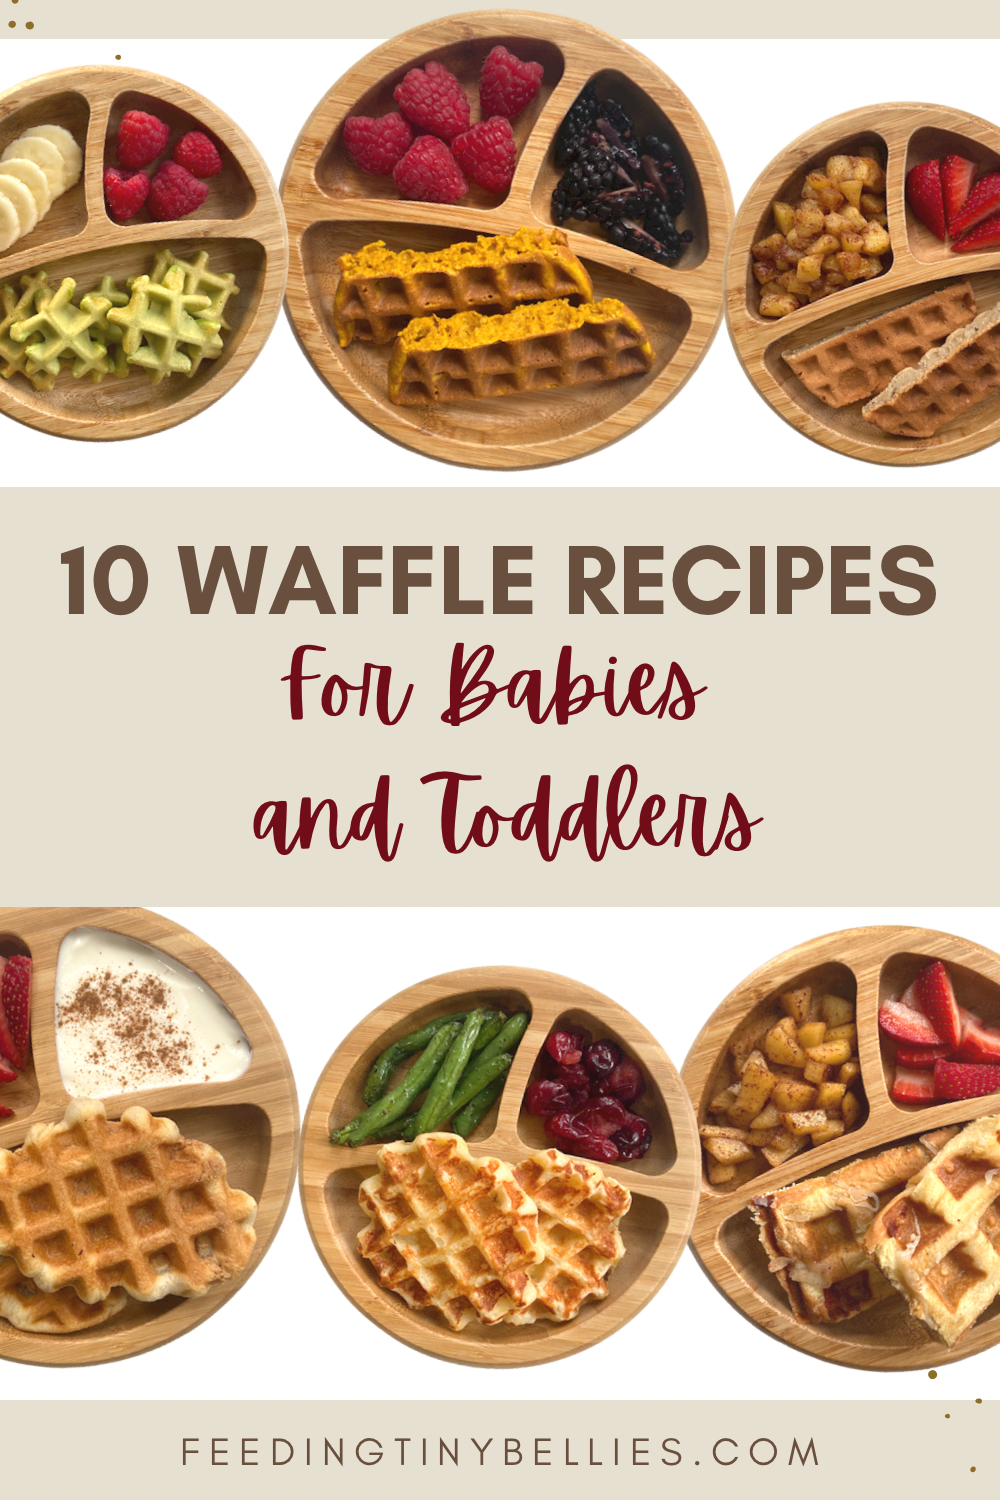 Healthy Banana Waffles For Baby Led Weaning - A Peachy Plate